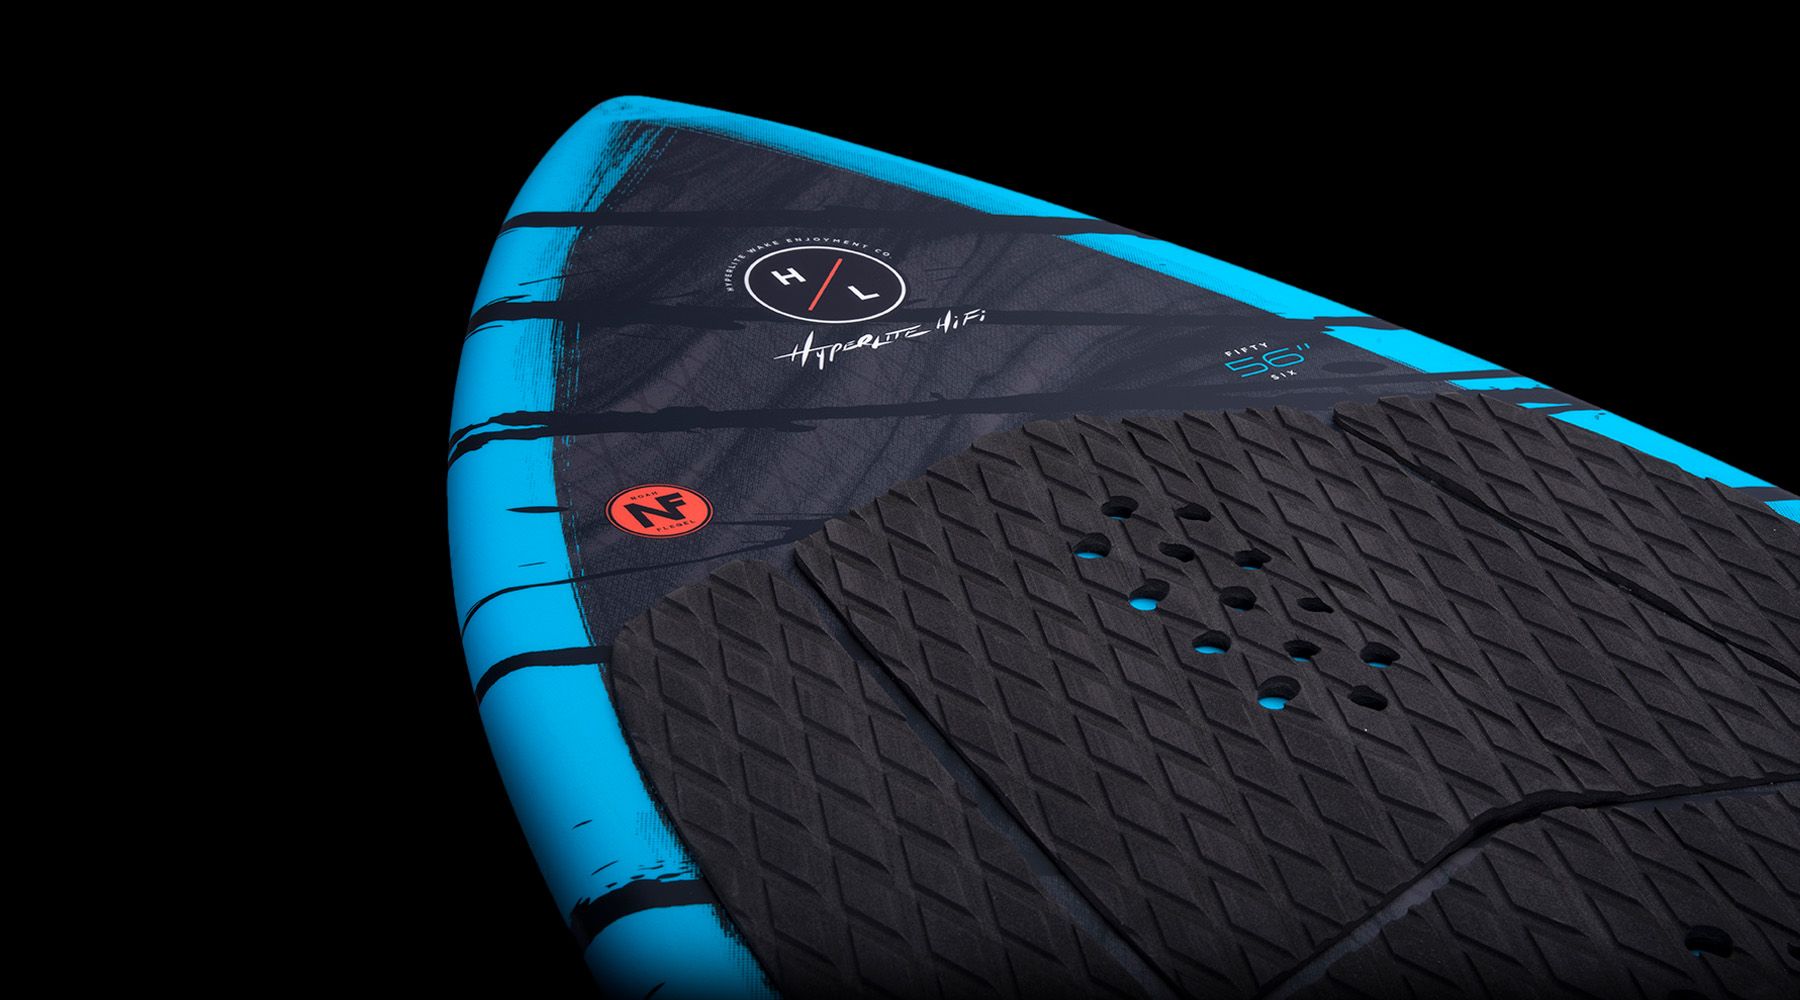 A Hyperlite 2023 Hi-Fi Wakesurf Board featuring a DuraShell construction and a Machined EVA Traction pad, with a blue and black design.